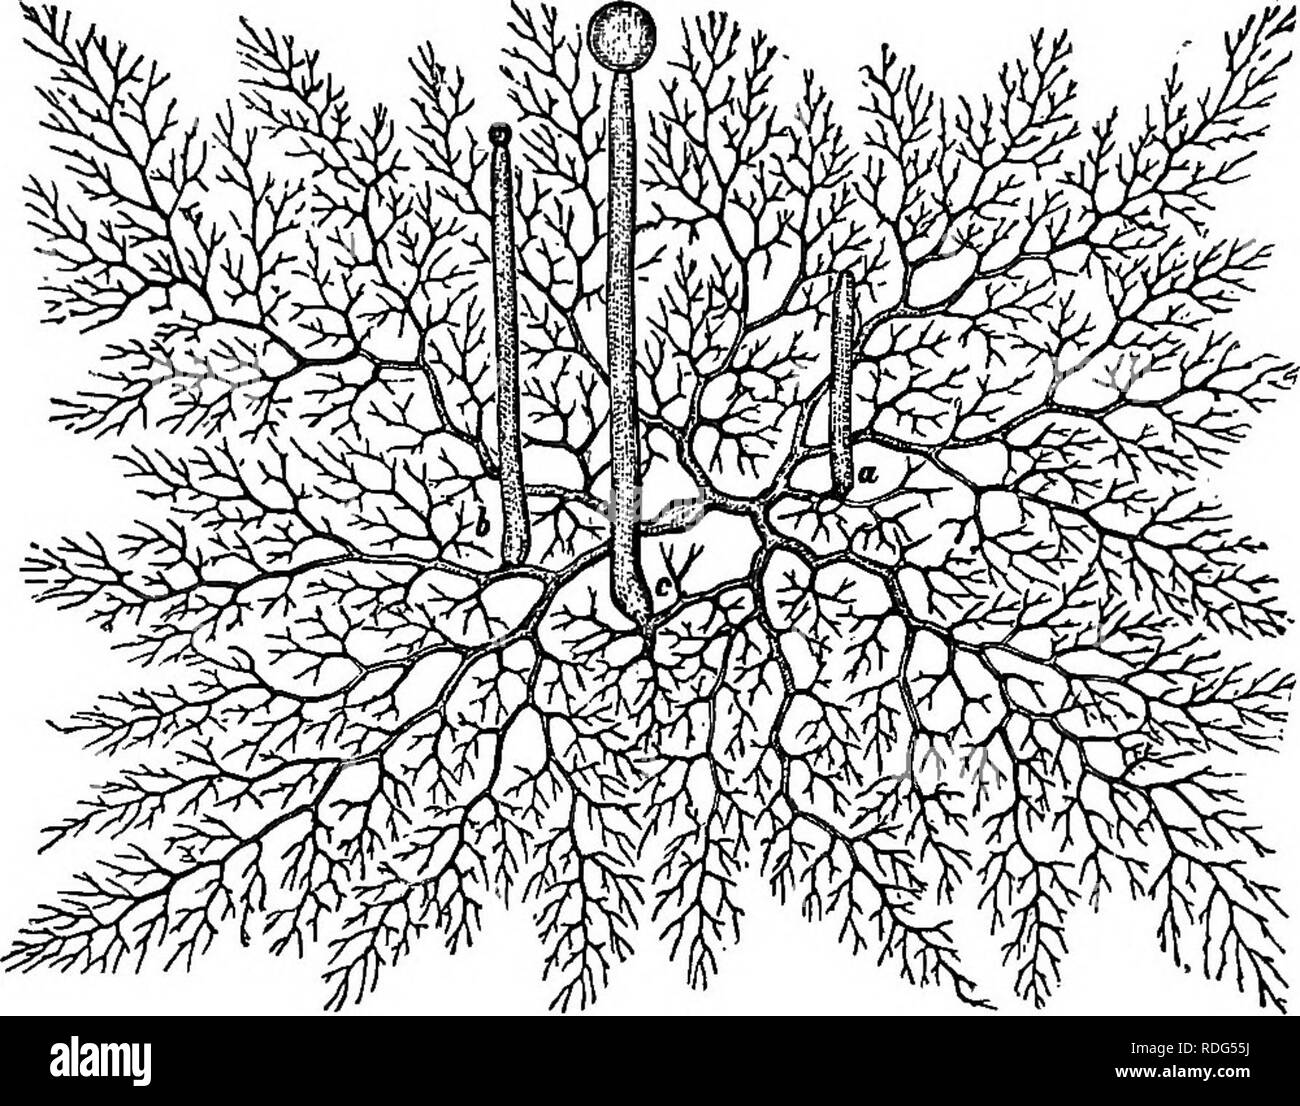 . Essentials of botany. Botany; Botany. THE FUNGI 247 (i) The root-like branches, or rMzoids, which proceed from some hyphae into the bread or other substratum. (c) Theipresence or absence of transverse partitions in the hyphse.. Fig. 172. Unicellular Mycelium of a Mold (Mucor Mucedo), sprung from a Single Spore. a, b, and c, branches for the production of spore-eases, showing various stages of maturity. (Considerably magnified.) (rf) The granular protoplasm, more abundant in some parts of the hyphse than in others. Make one or more drawings to show the points above mentioned (a-d). 320. Repro Stock Photo